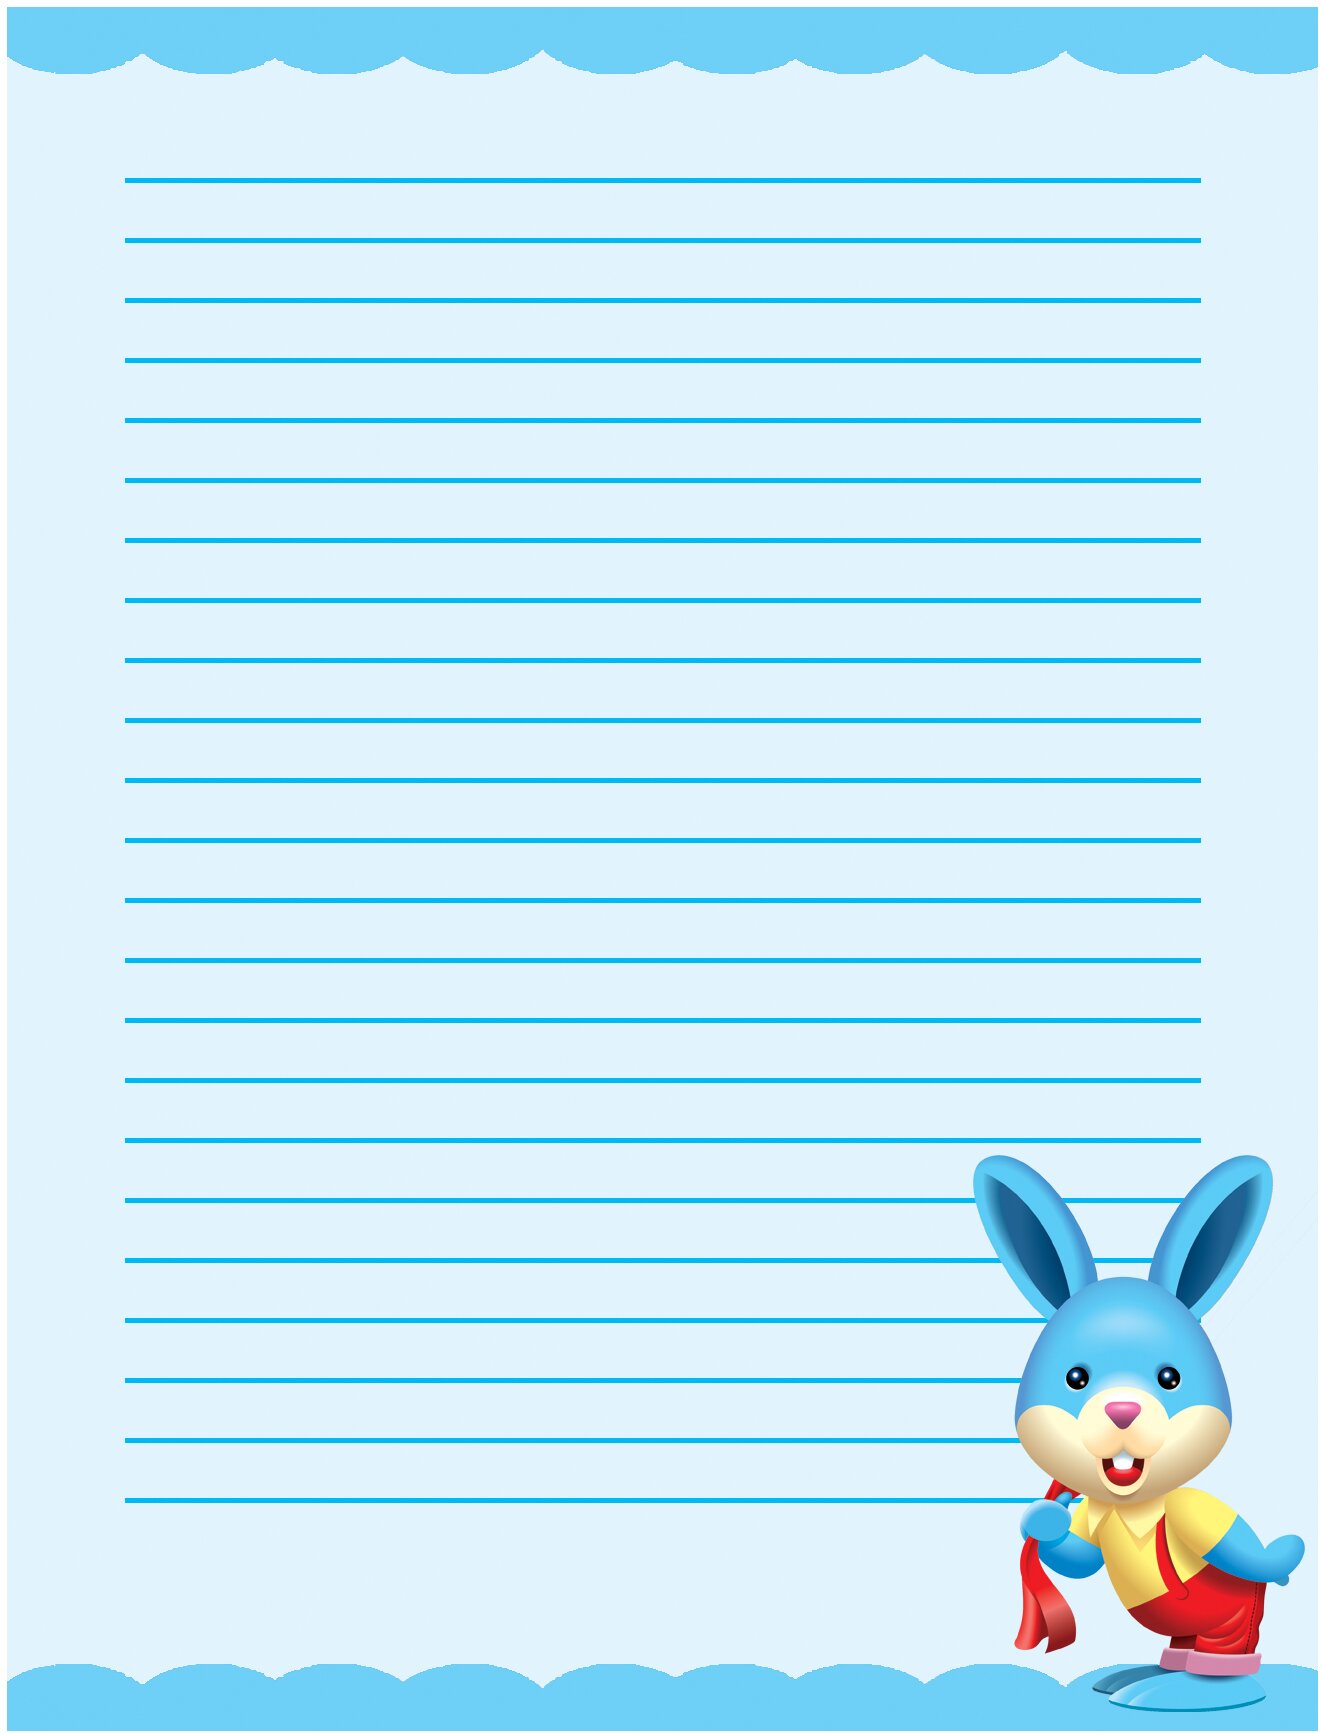 Cute bunny single lined writing paper template